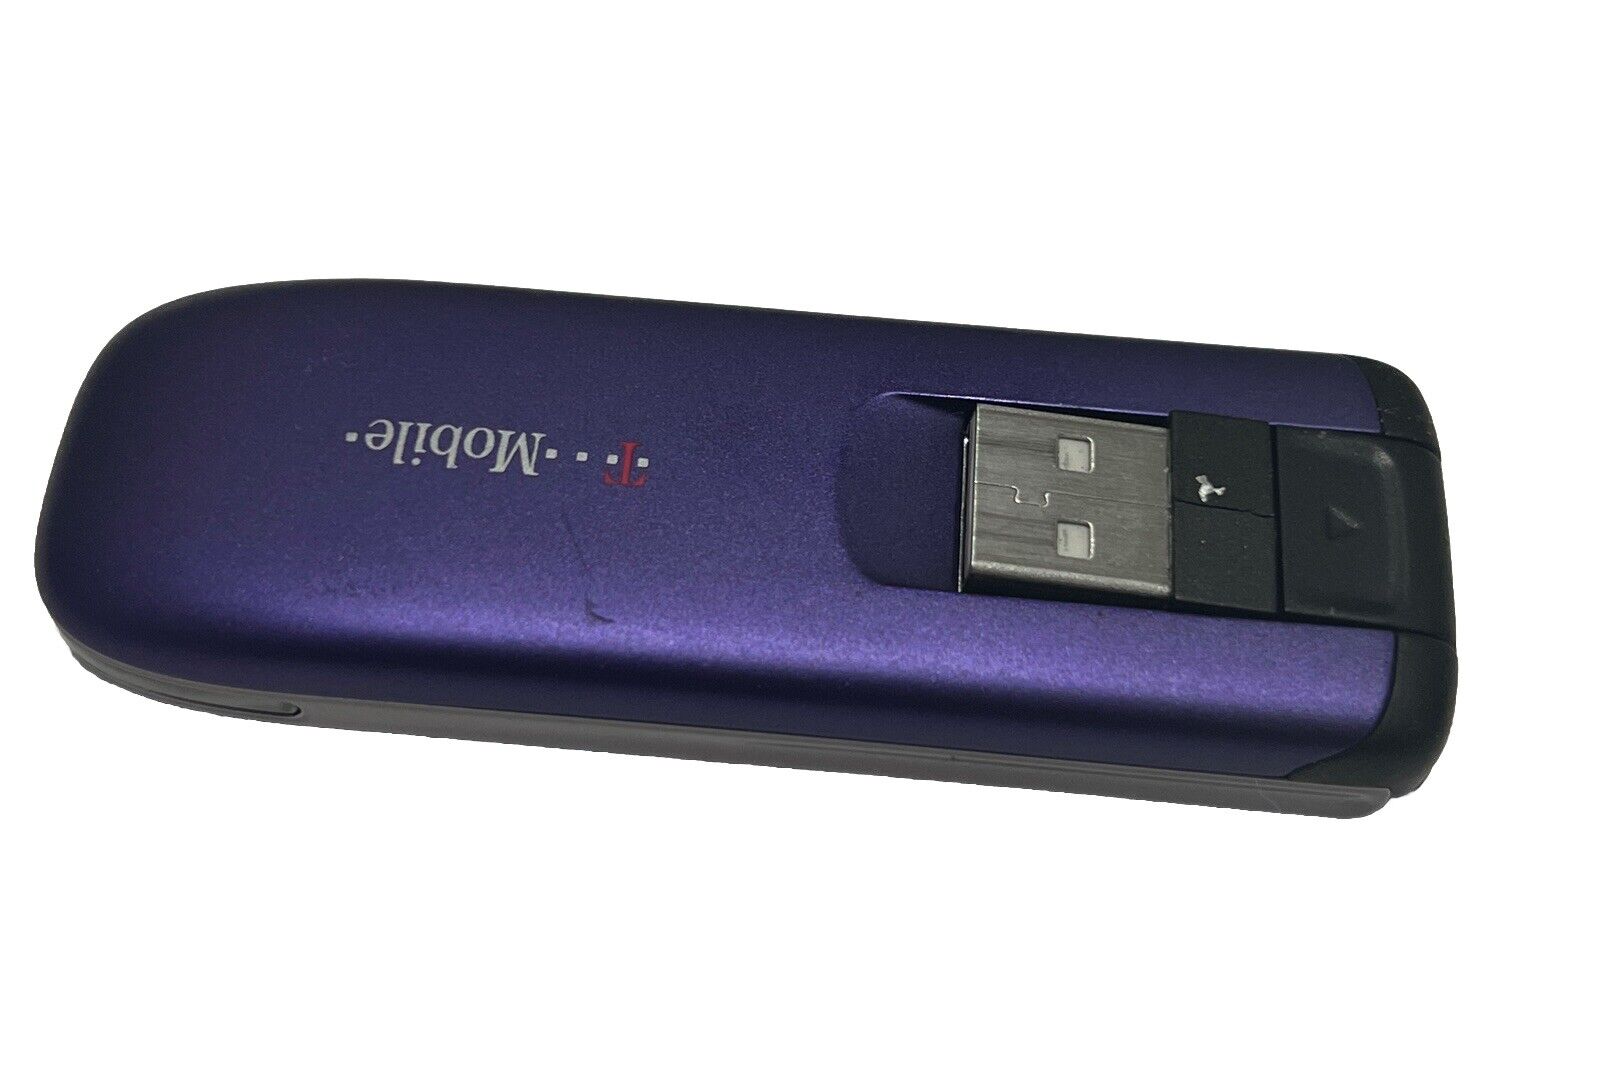 T-MOBILE ZTE MF683 4G USB Modem Aircard (Purple) - Used  C2